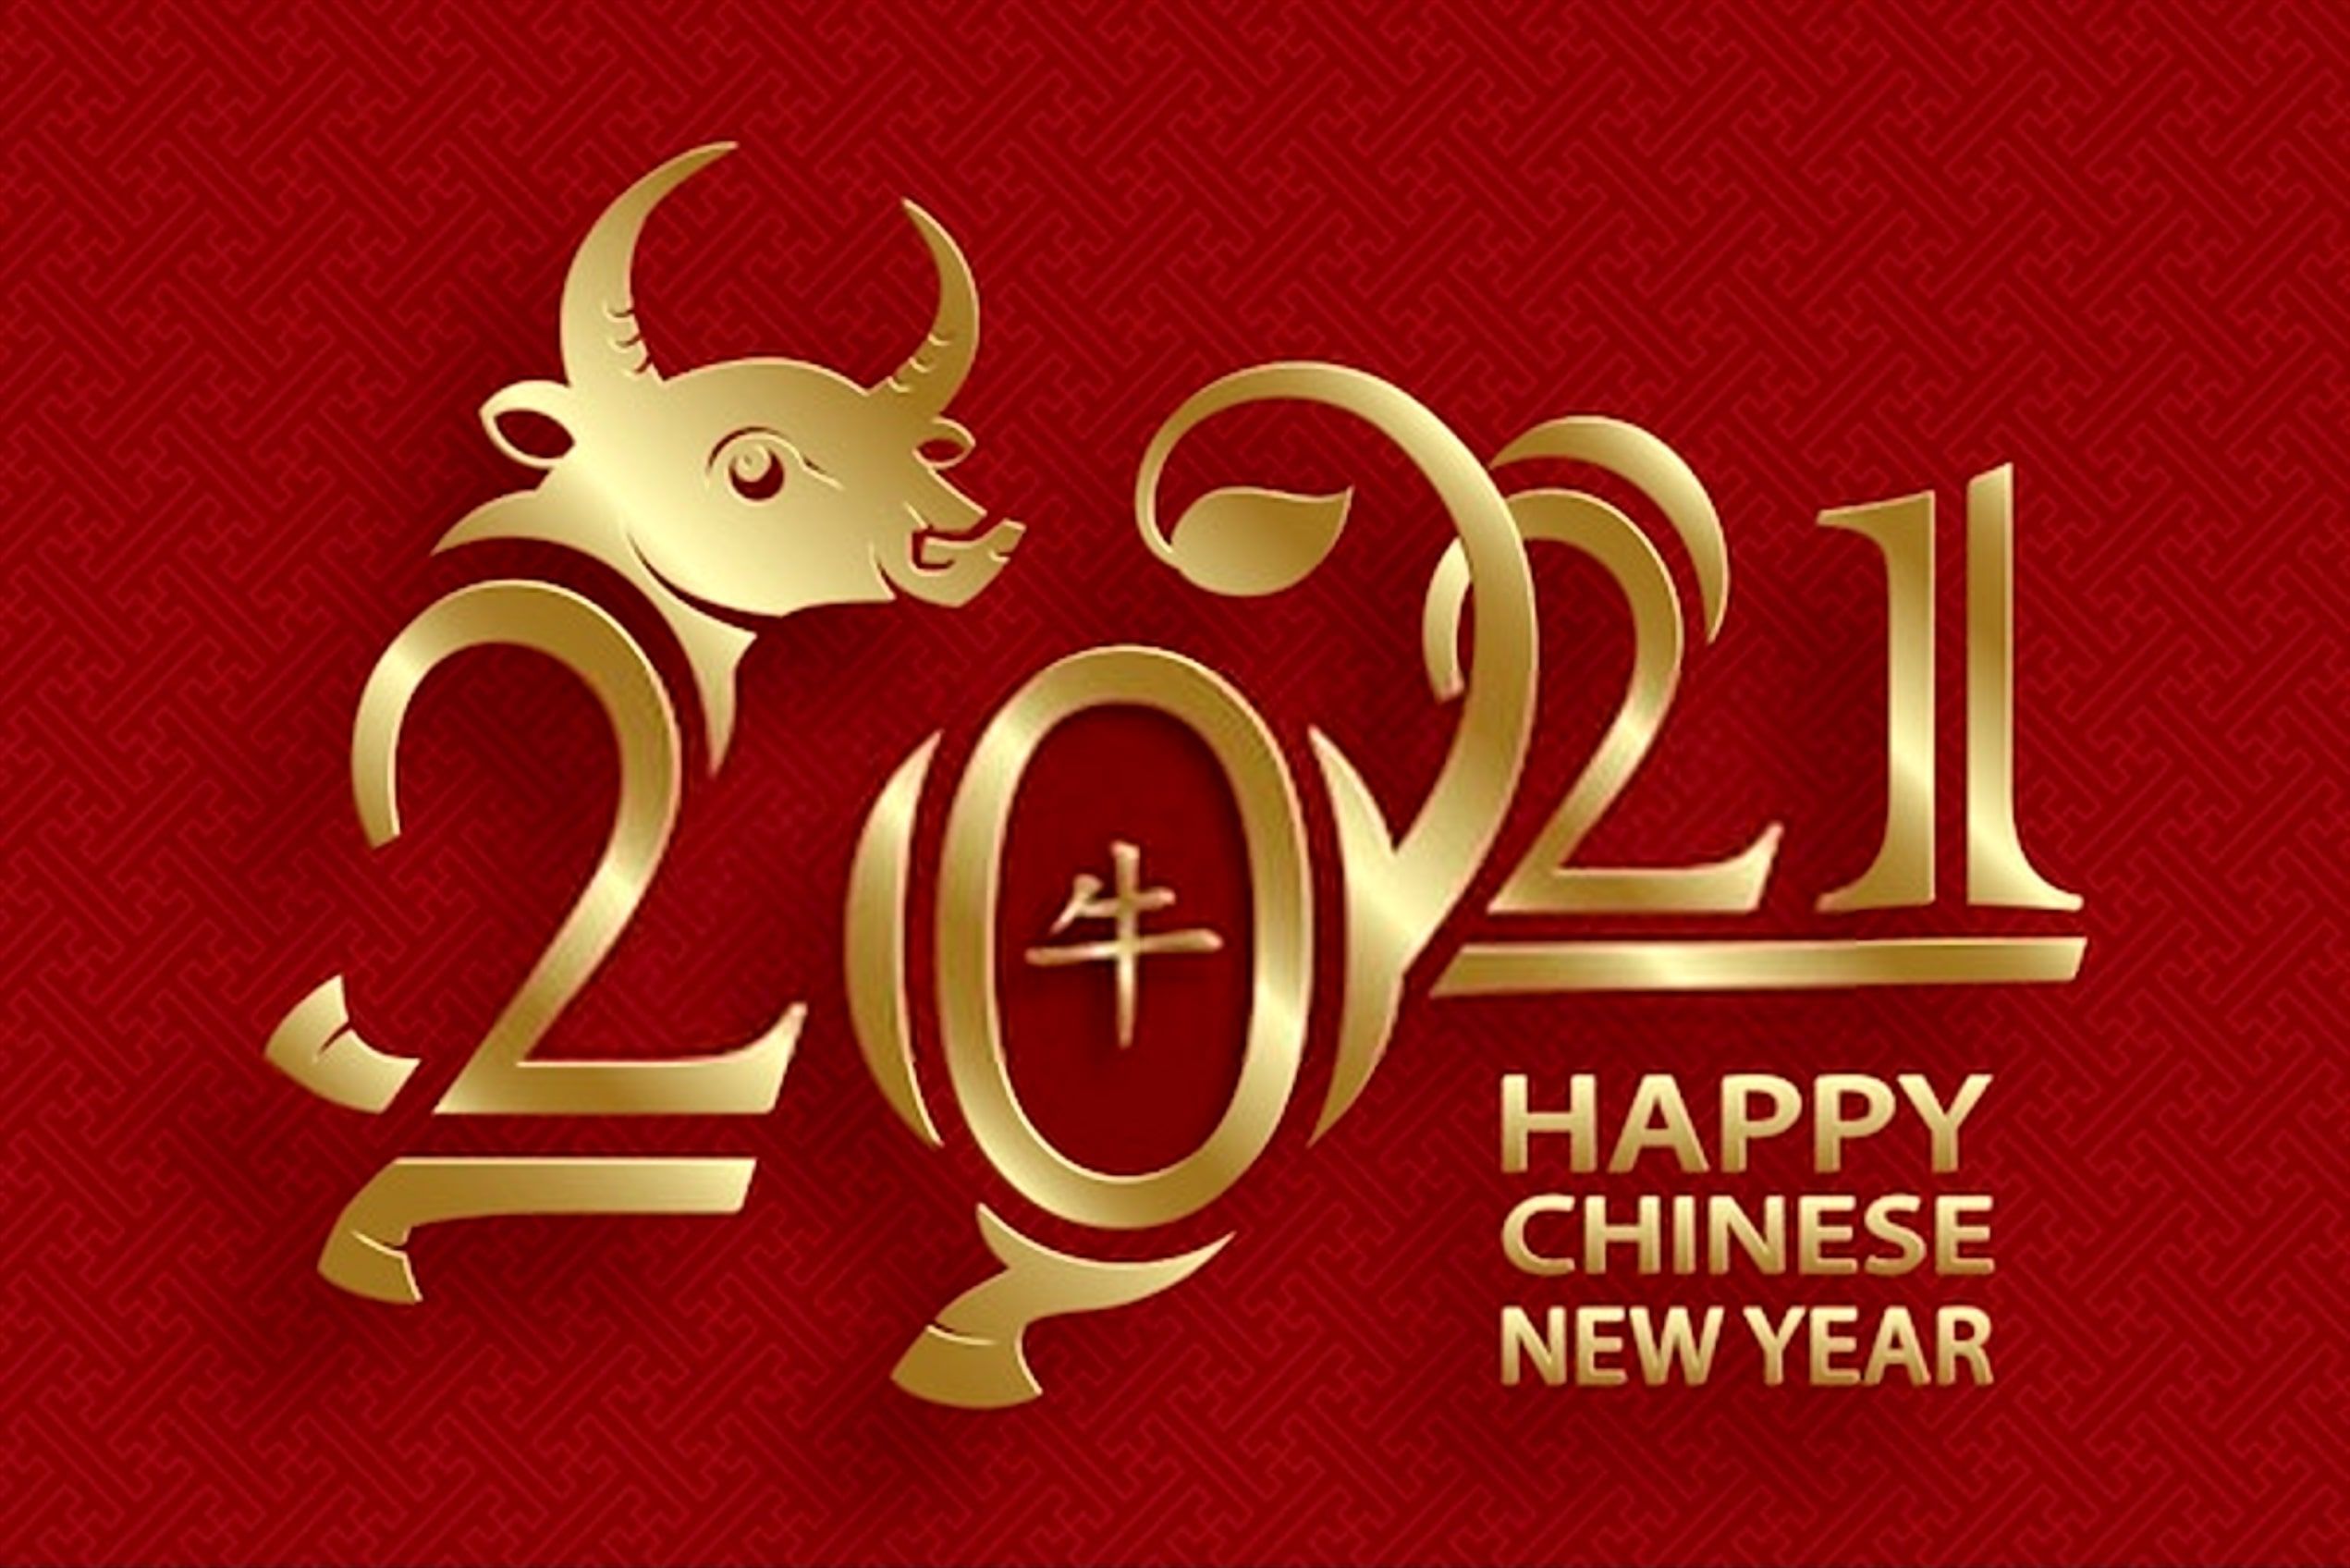 Happy Chinese New Year 2021 Image Wallpaper. Chinese new year greeting, Happy chinese new year, Chinese new year image